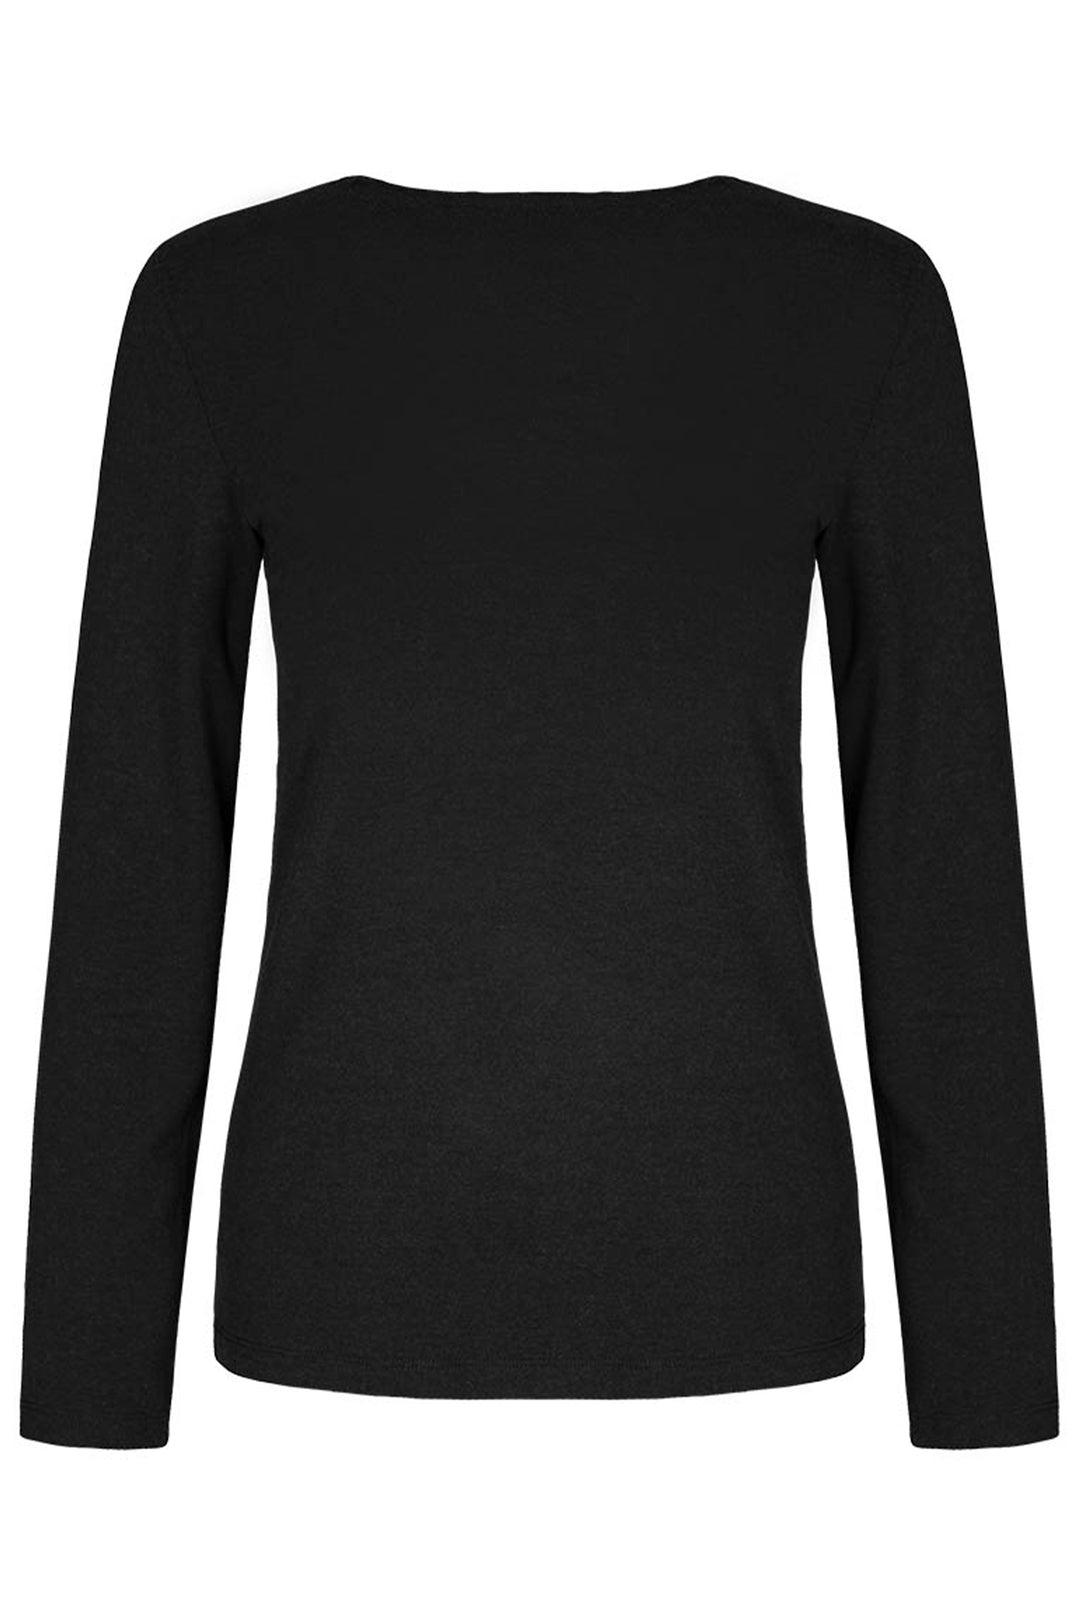 Dolcezza women's long sleeve V-neck cotton top - charcoal back